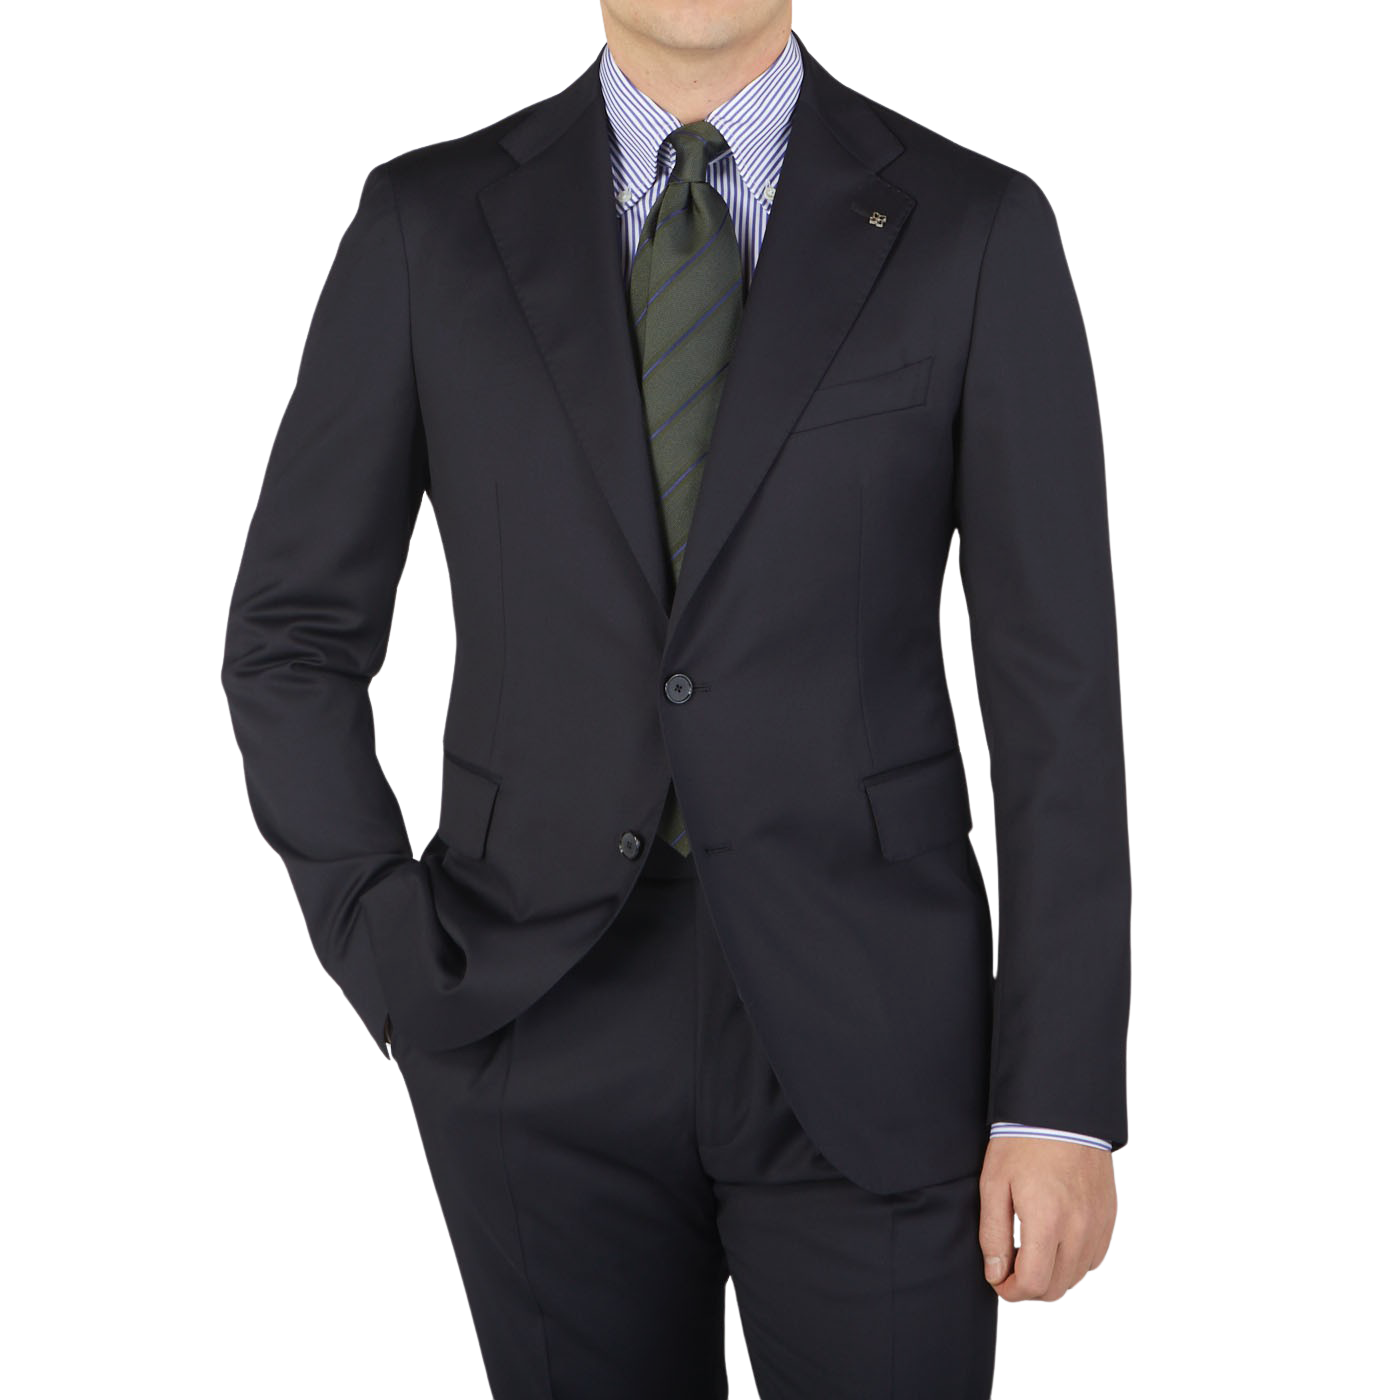 A man wearing a Tagliatore Midnight Navy Super 110s Wool Suit Jacket with a slim cut and tie.